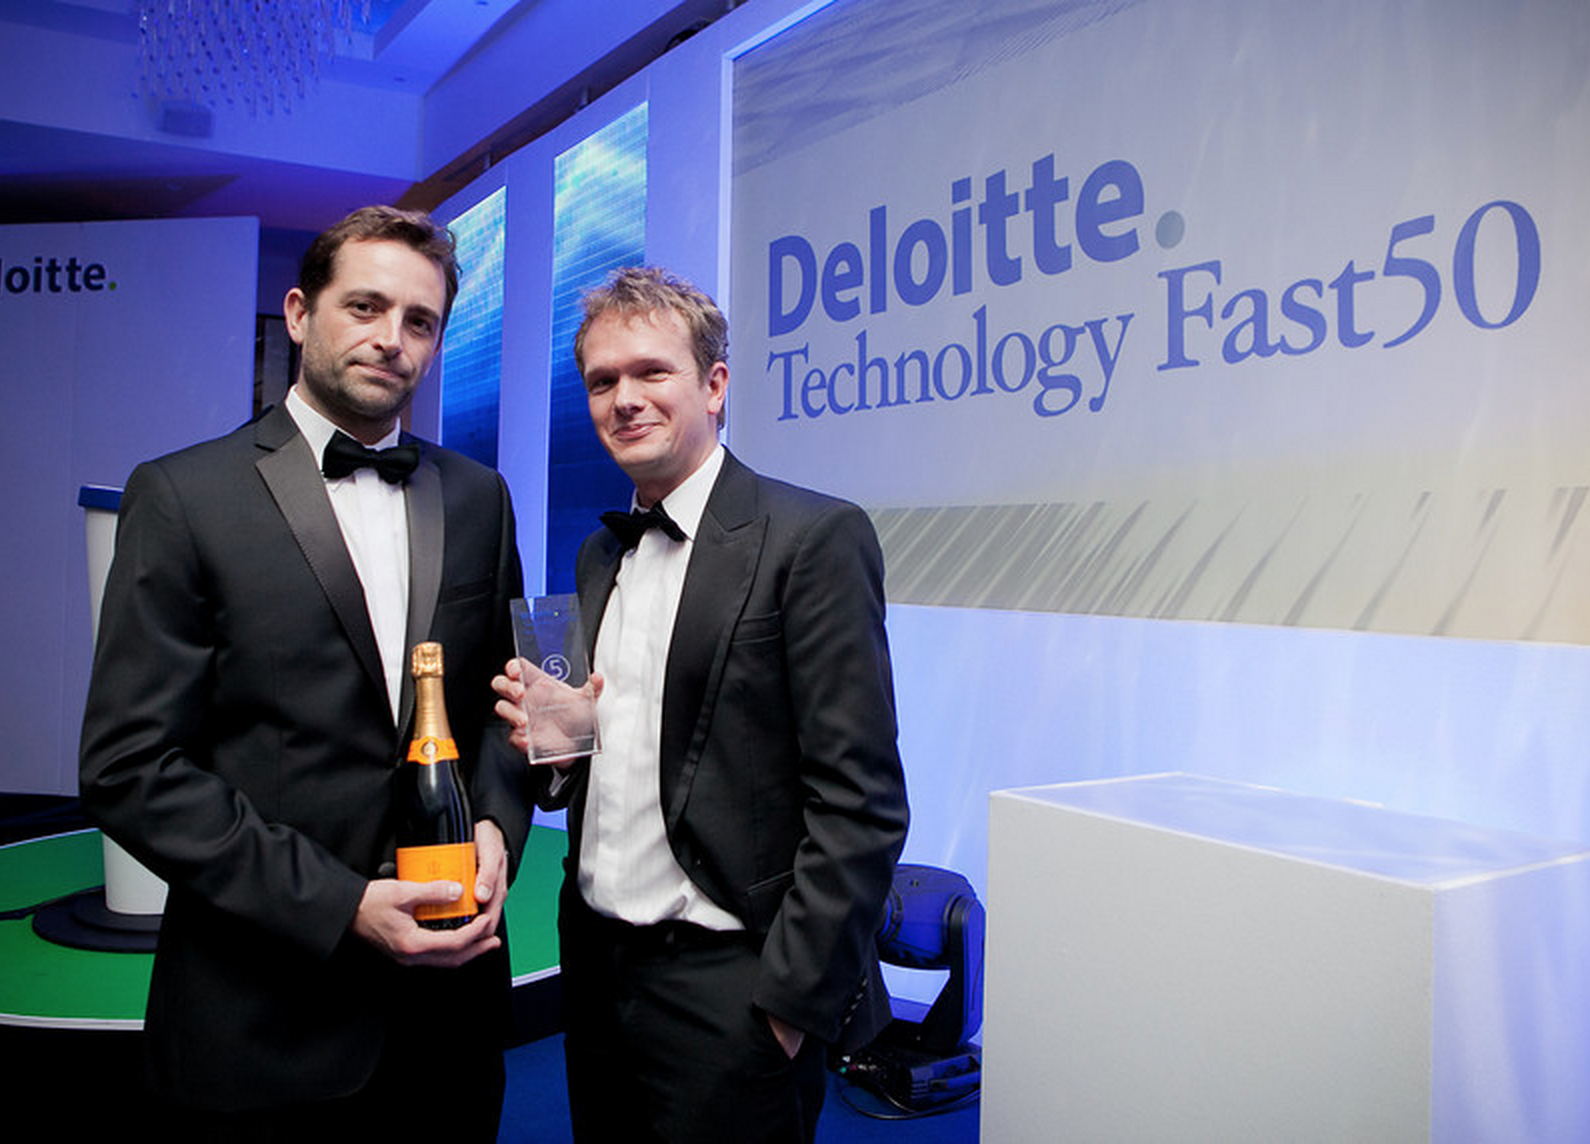 Co-founders Brett Harding and Laurence Holloway pick up the award